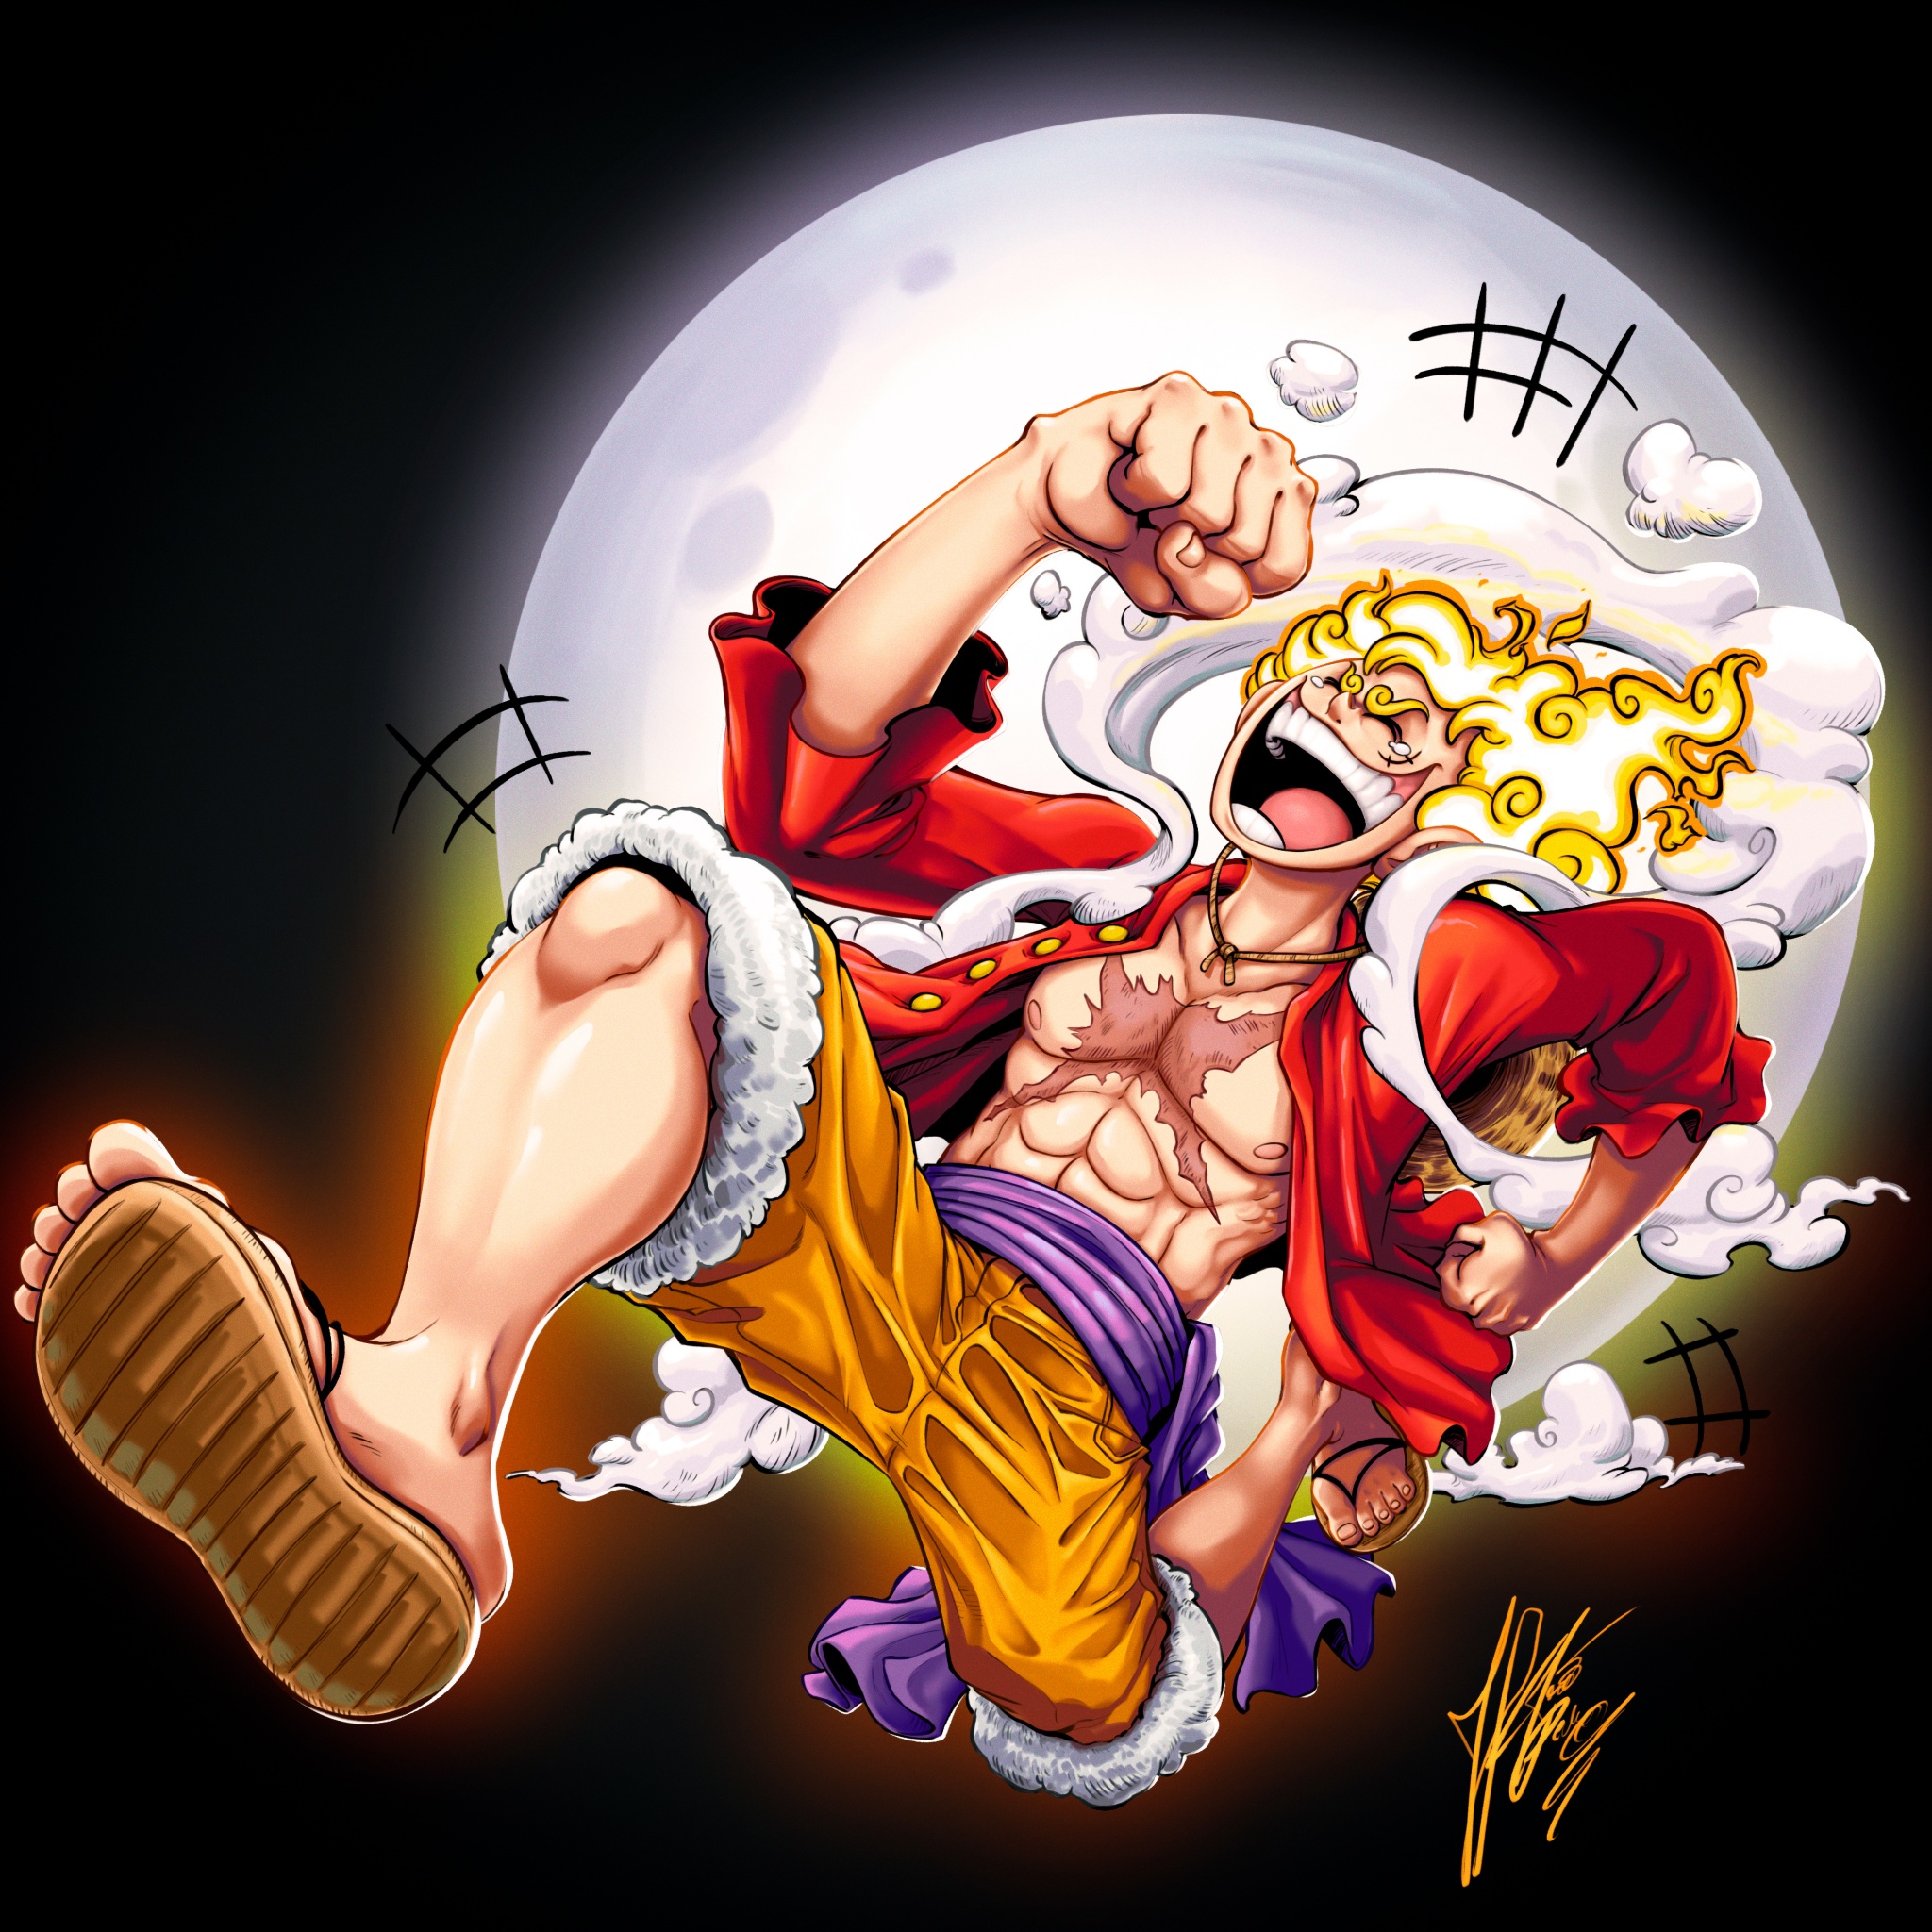 150 Gear 5 One Piece HD Wallpapers and Backgrounds